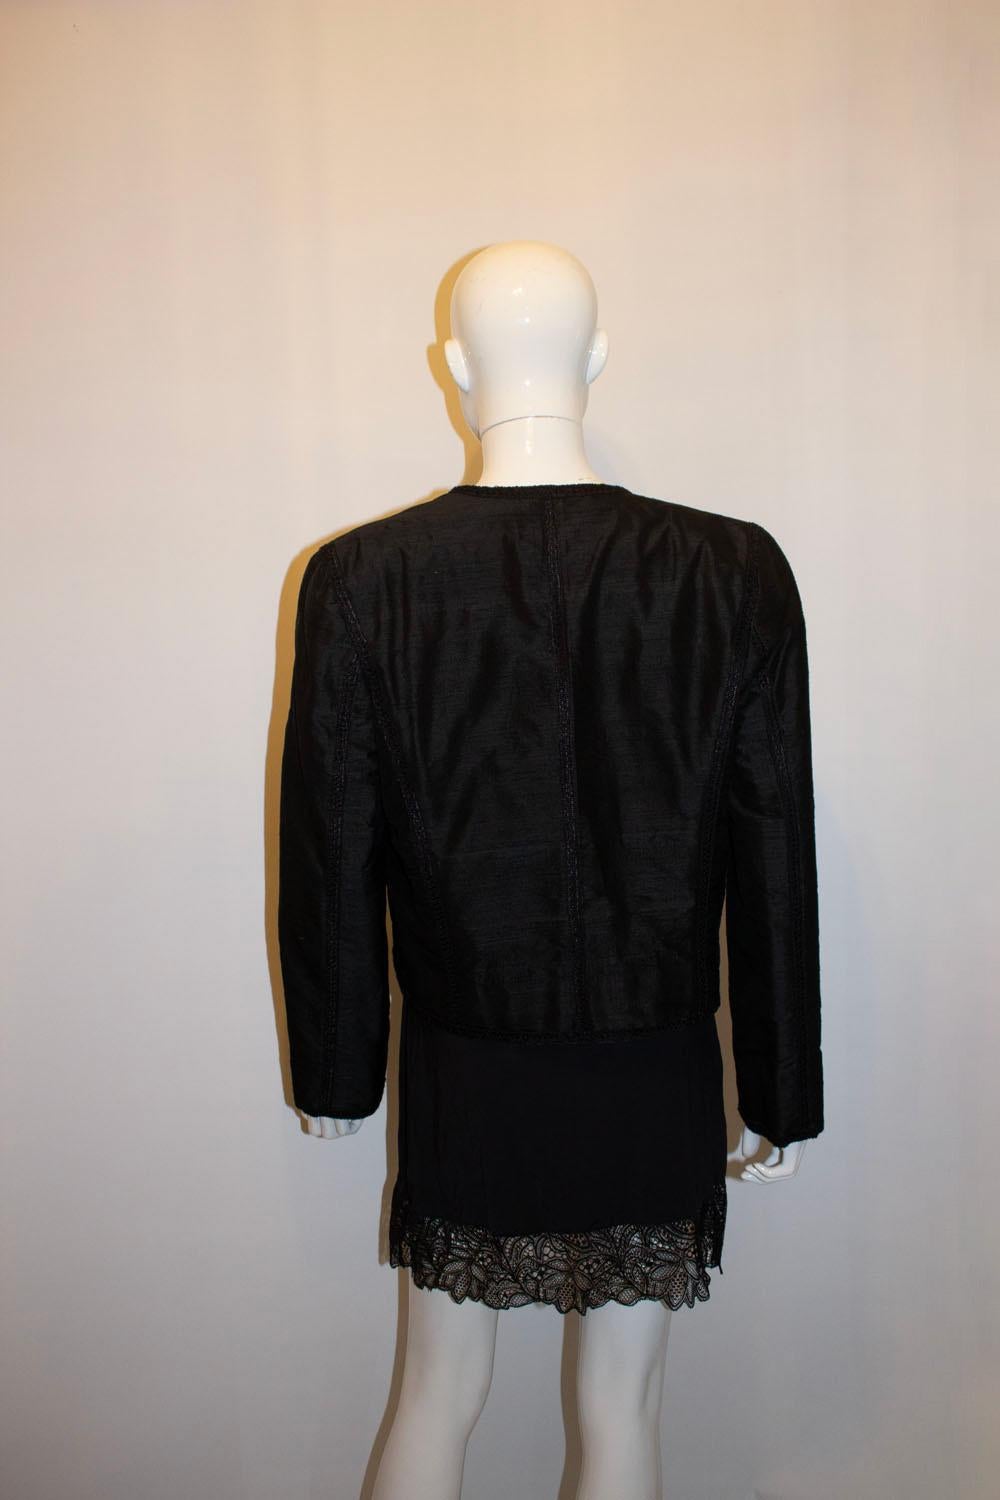 A stunning vintage black silk evening jacket. The jacket is in a wonderful raw silk with decorative trim. It doesnt have a fastening , but one could be easily added and is fully lined.
Measurements: Bust  up to 38'', length 21''